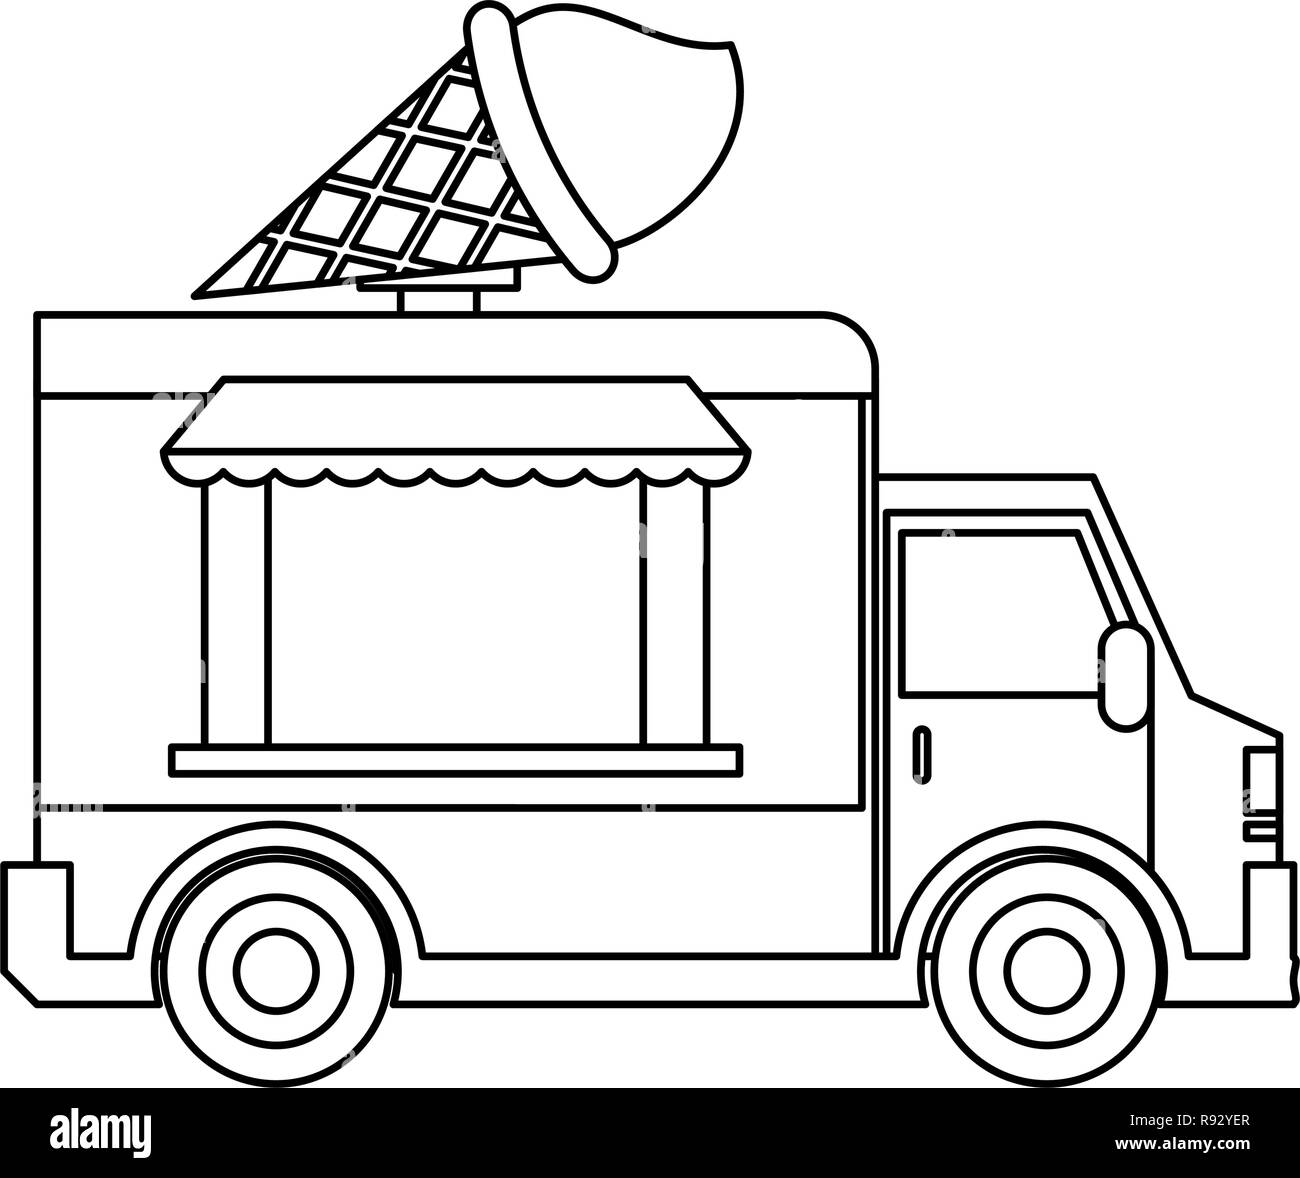 Food truck restaurant in black and white Stock Vector